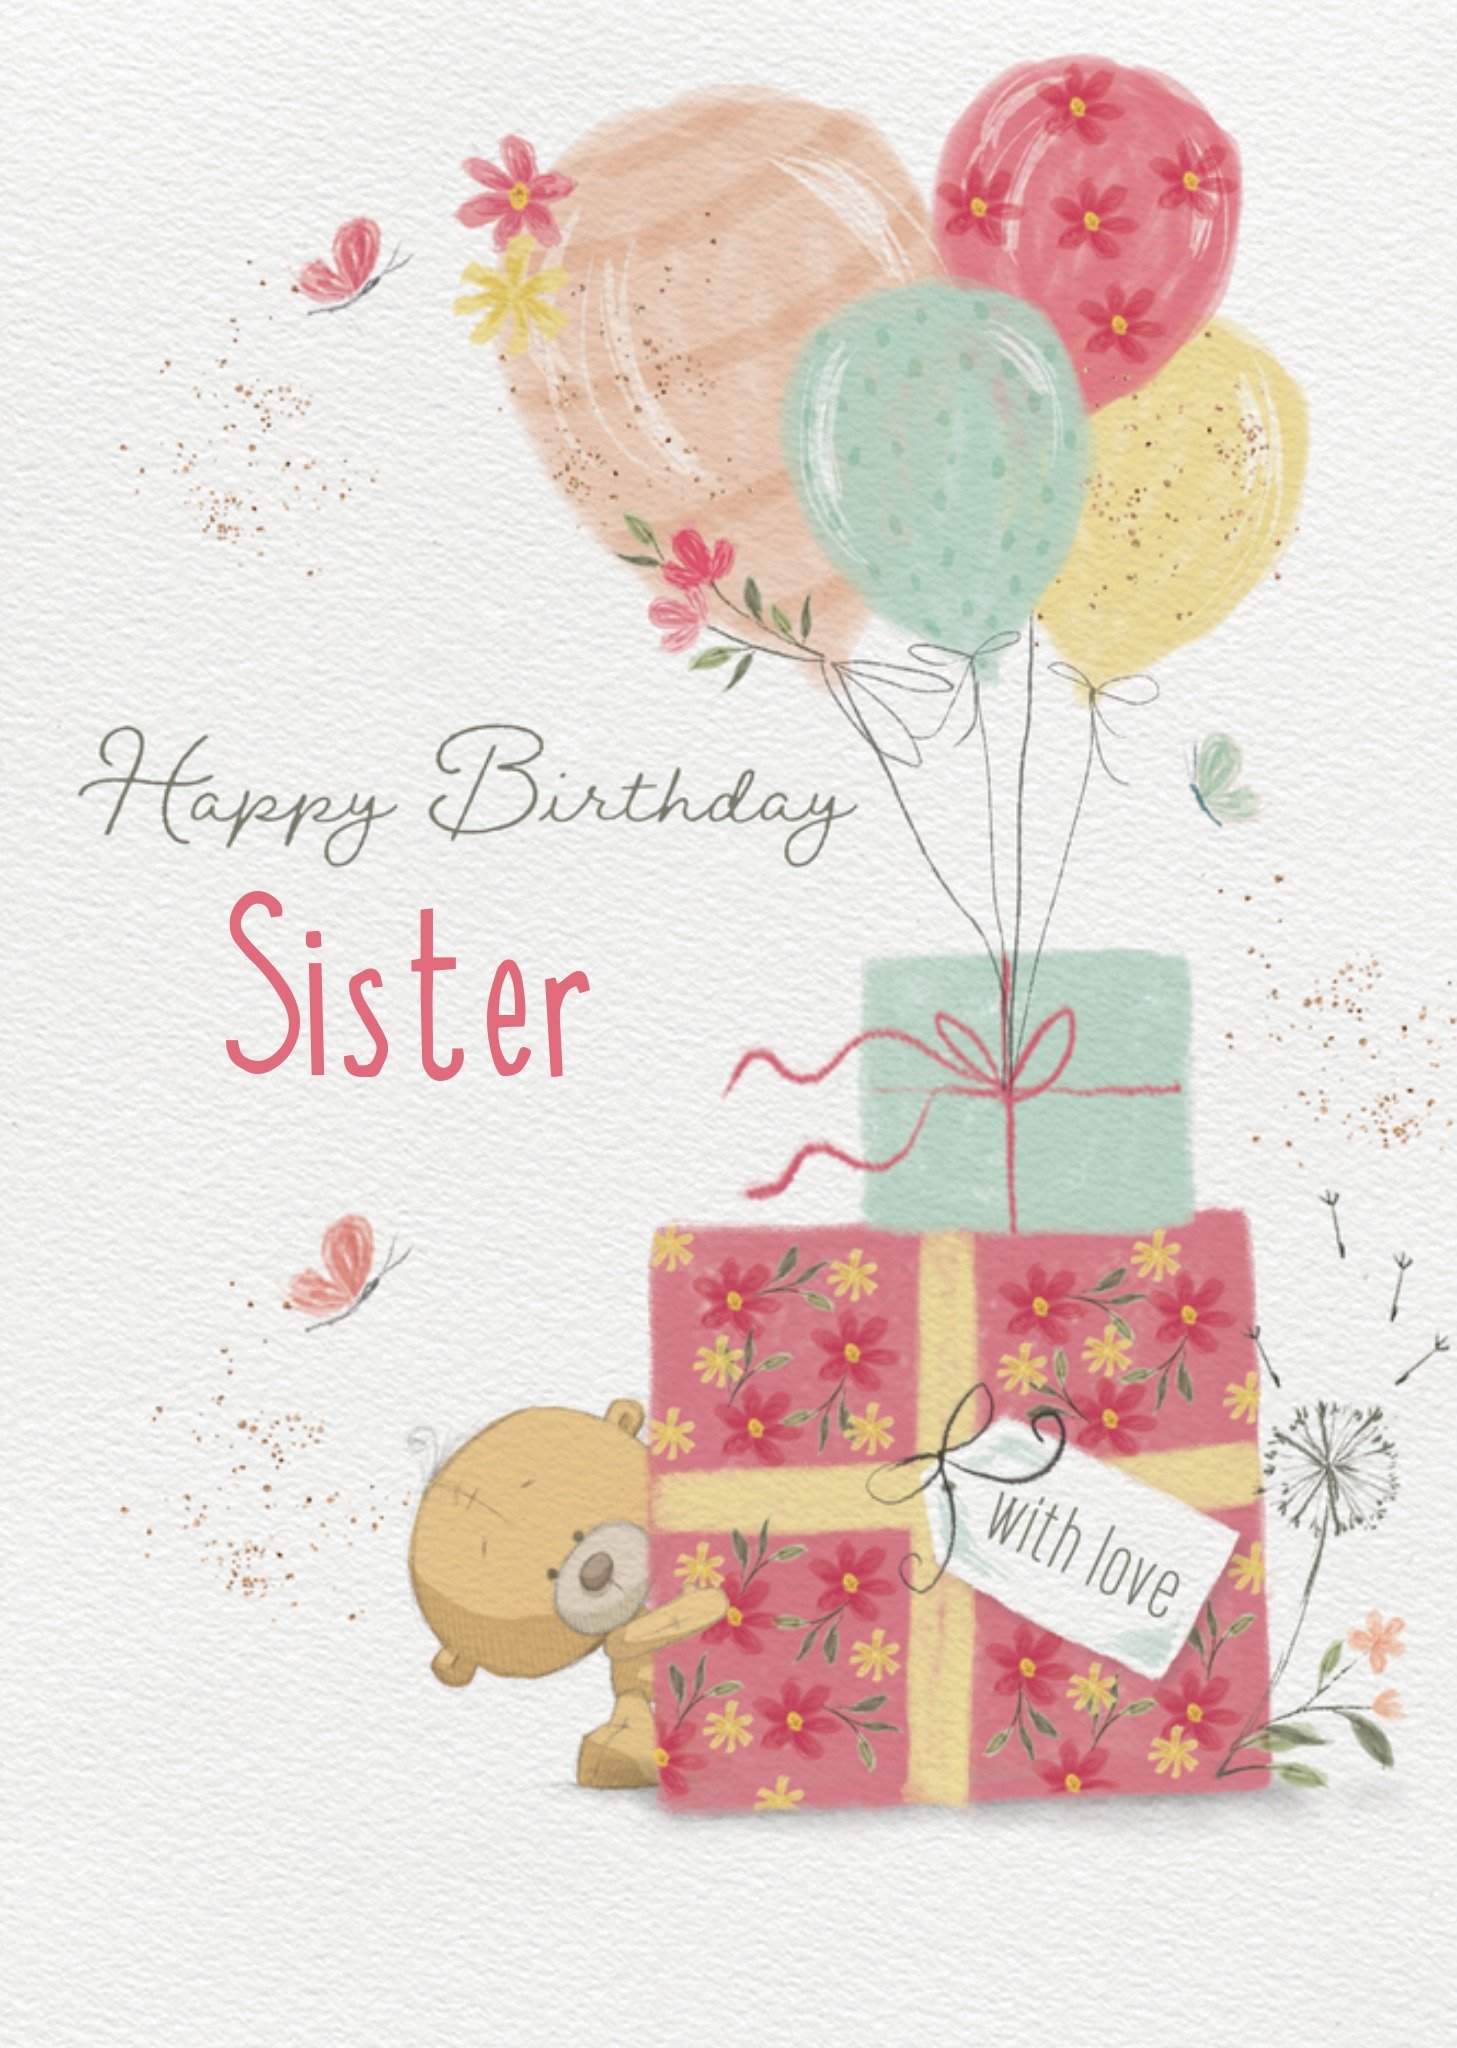 Uddle Happy Birthday Sister Illustrated Balloons And Wrapped Presents Birthday Card Ecard